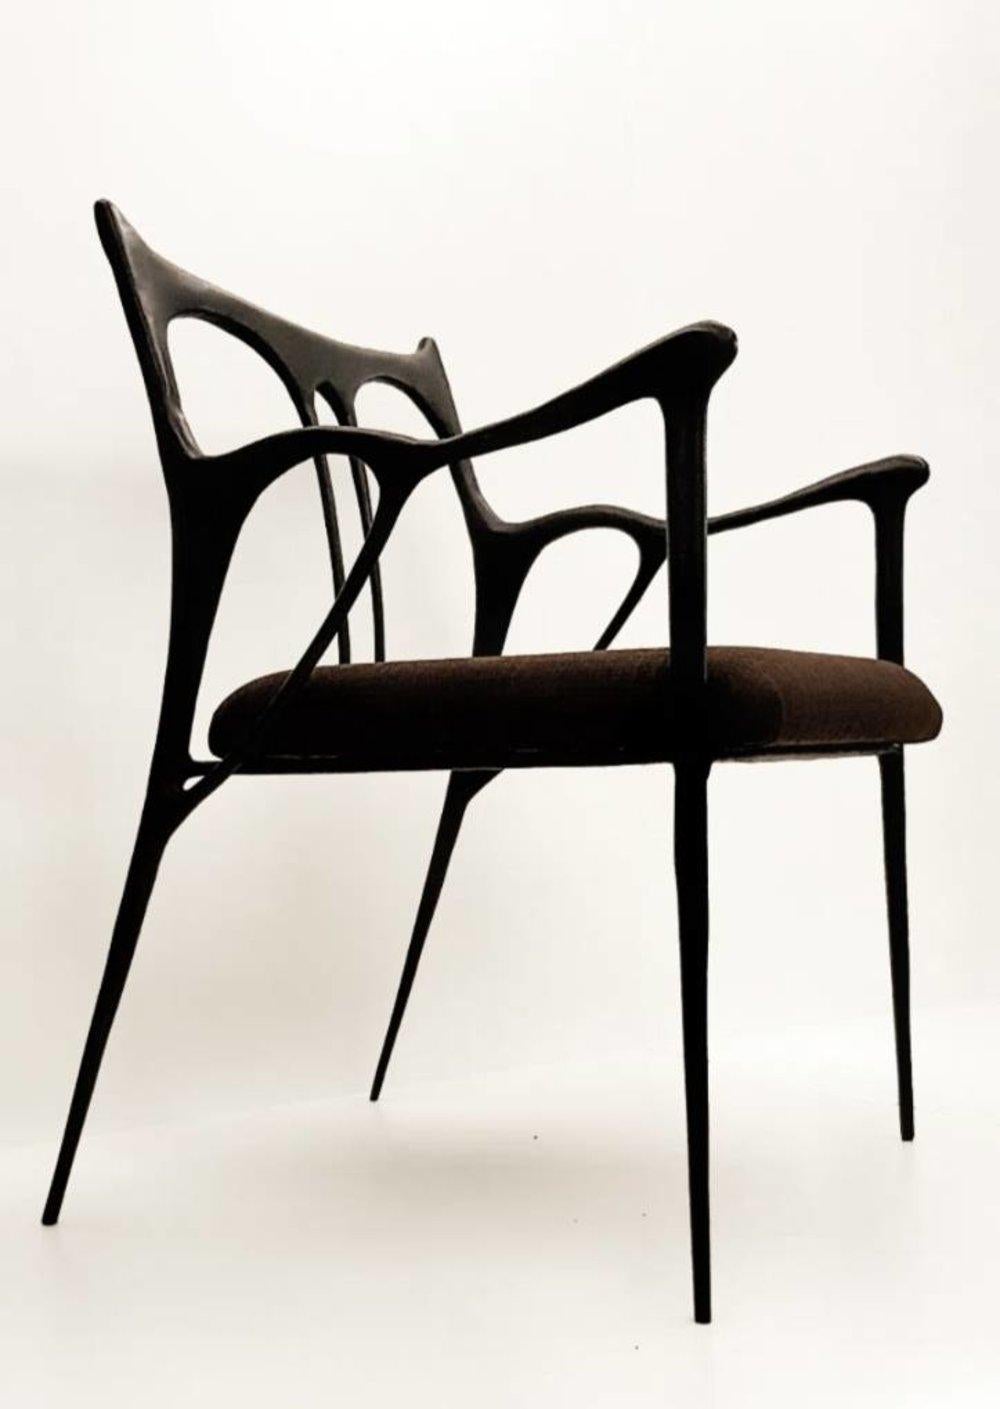 Contemporary Black Brass Sculpted Chair by Misaya